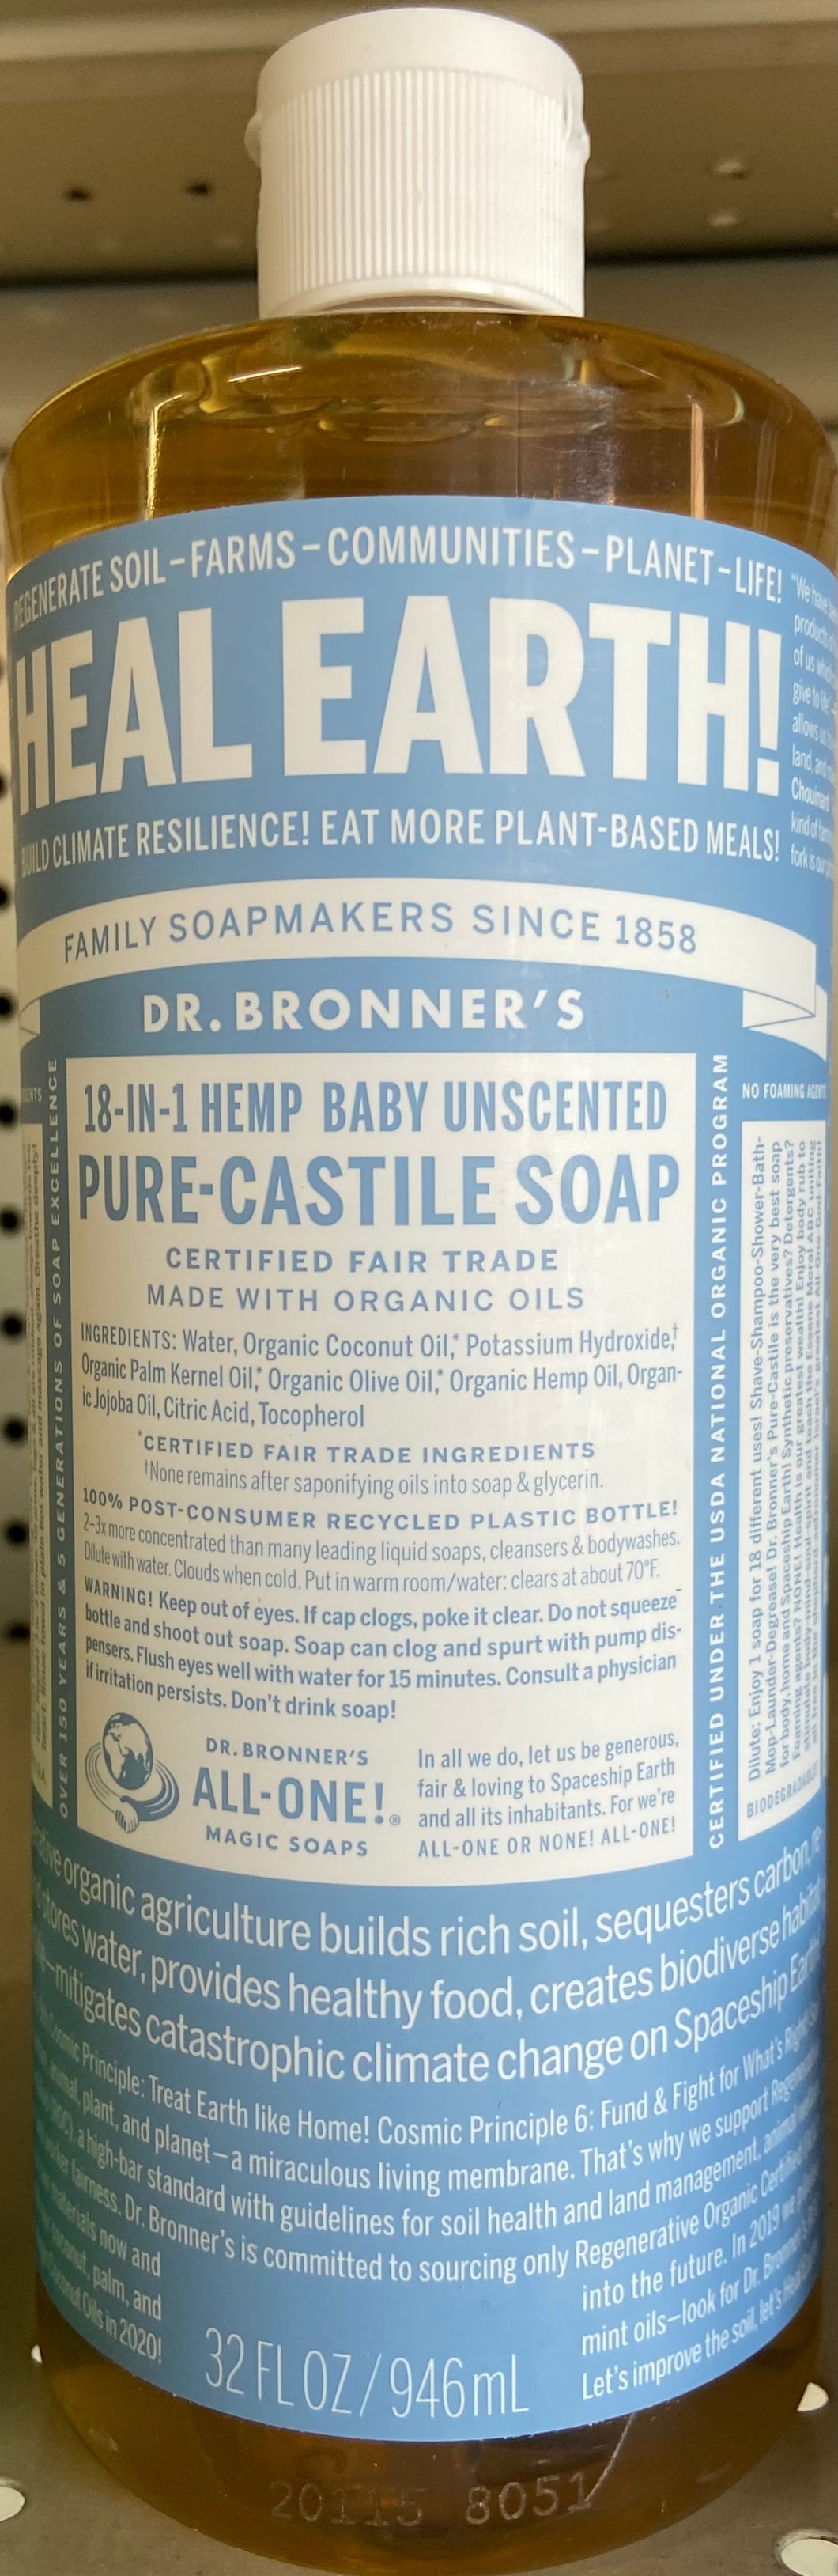 Liquid Soap, Organic Baby Unscented Castile, Dr. Bronner's